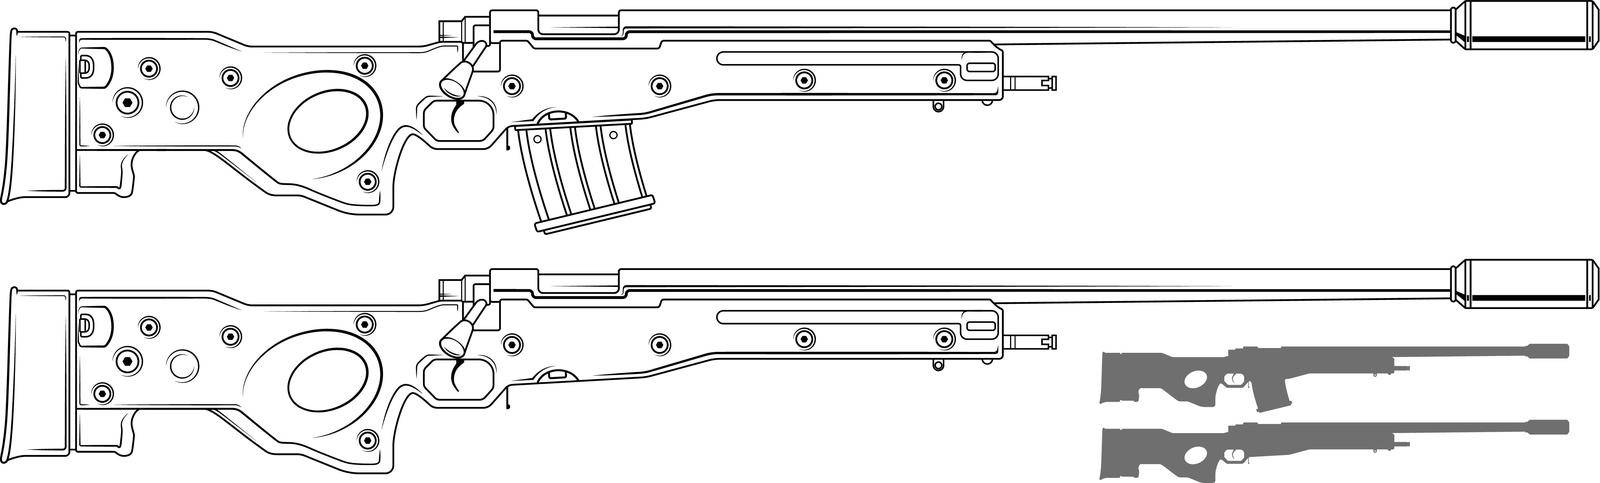 Graphic sniper rifle with ammo clip by GB_Art